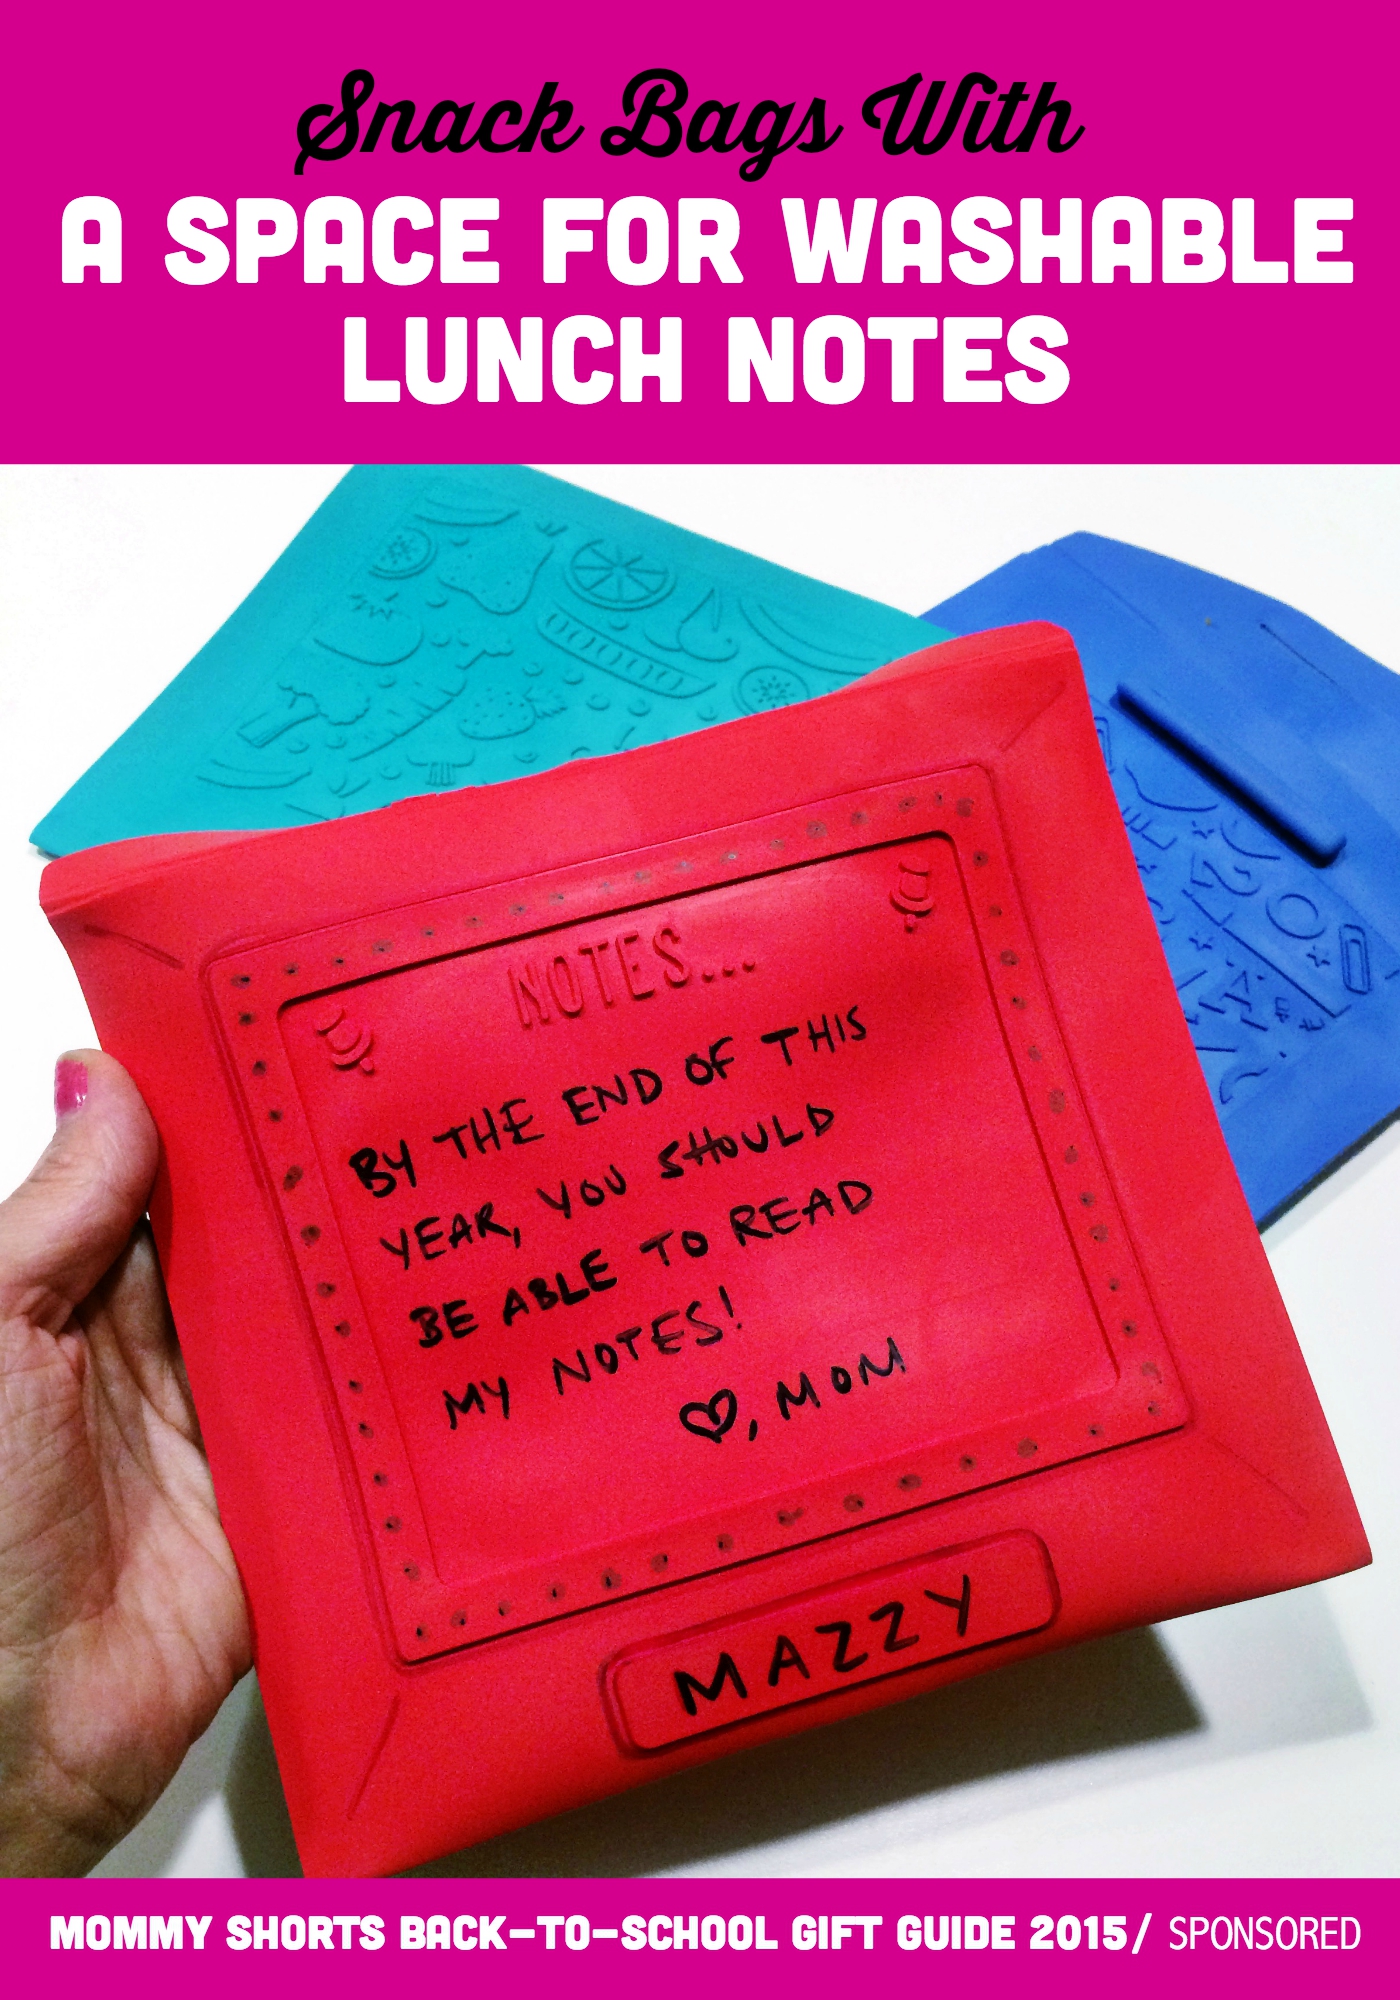 Snack Bags With A Space for Washable Lunch Notes